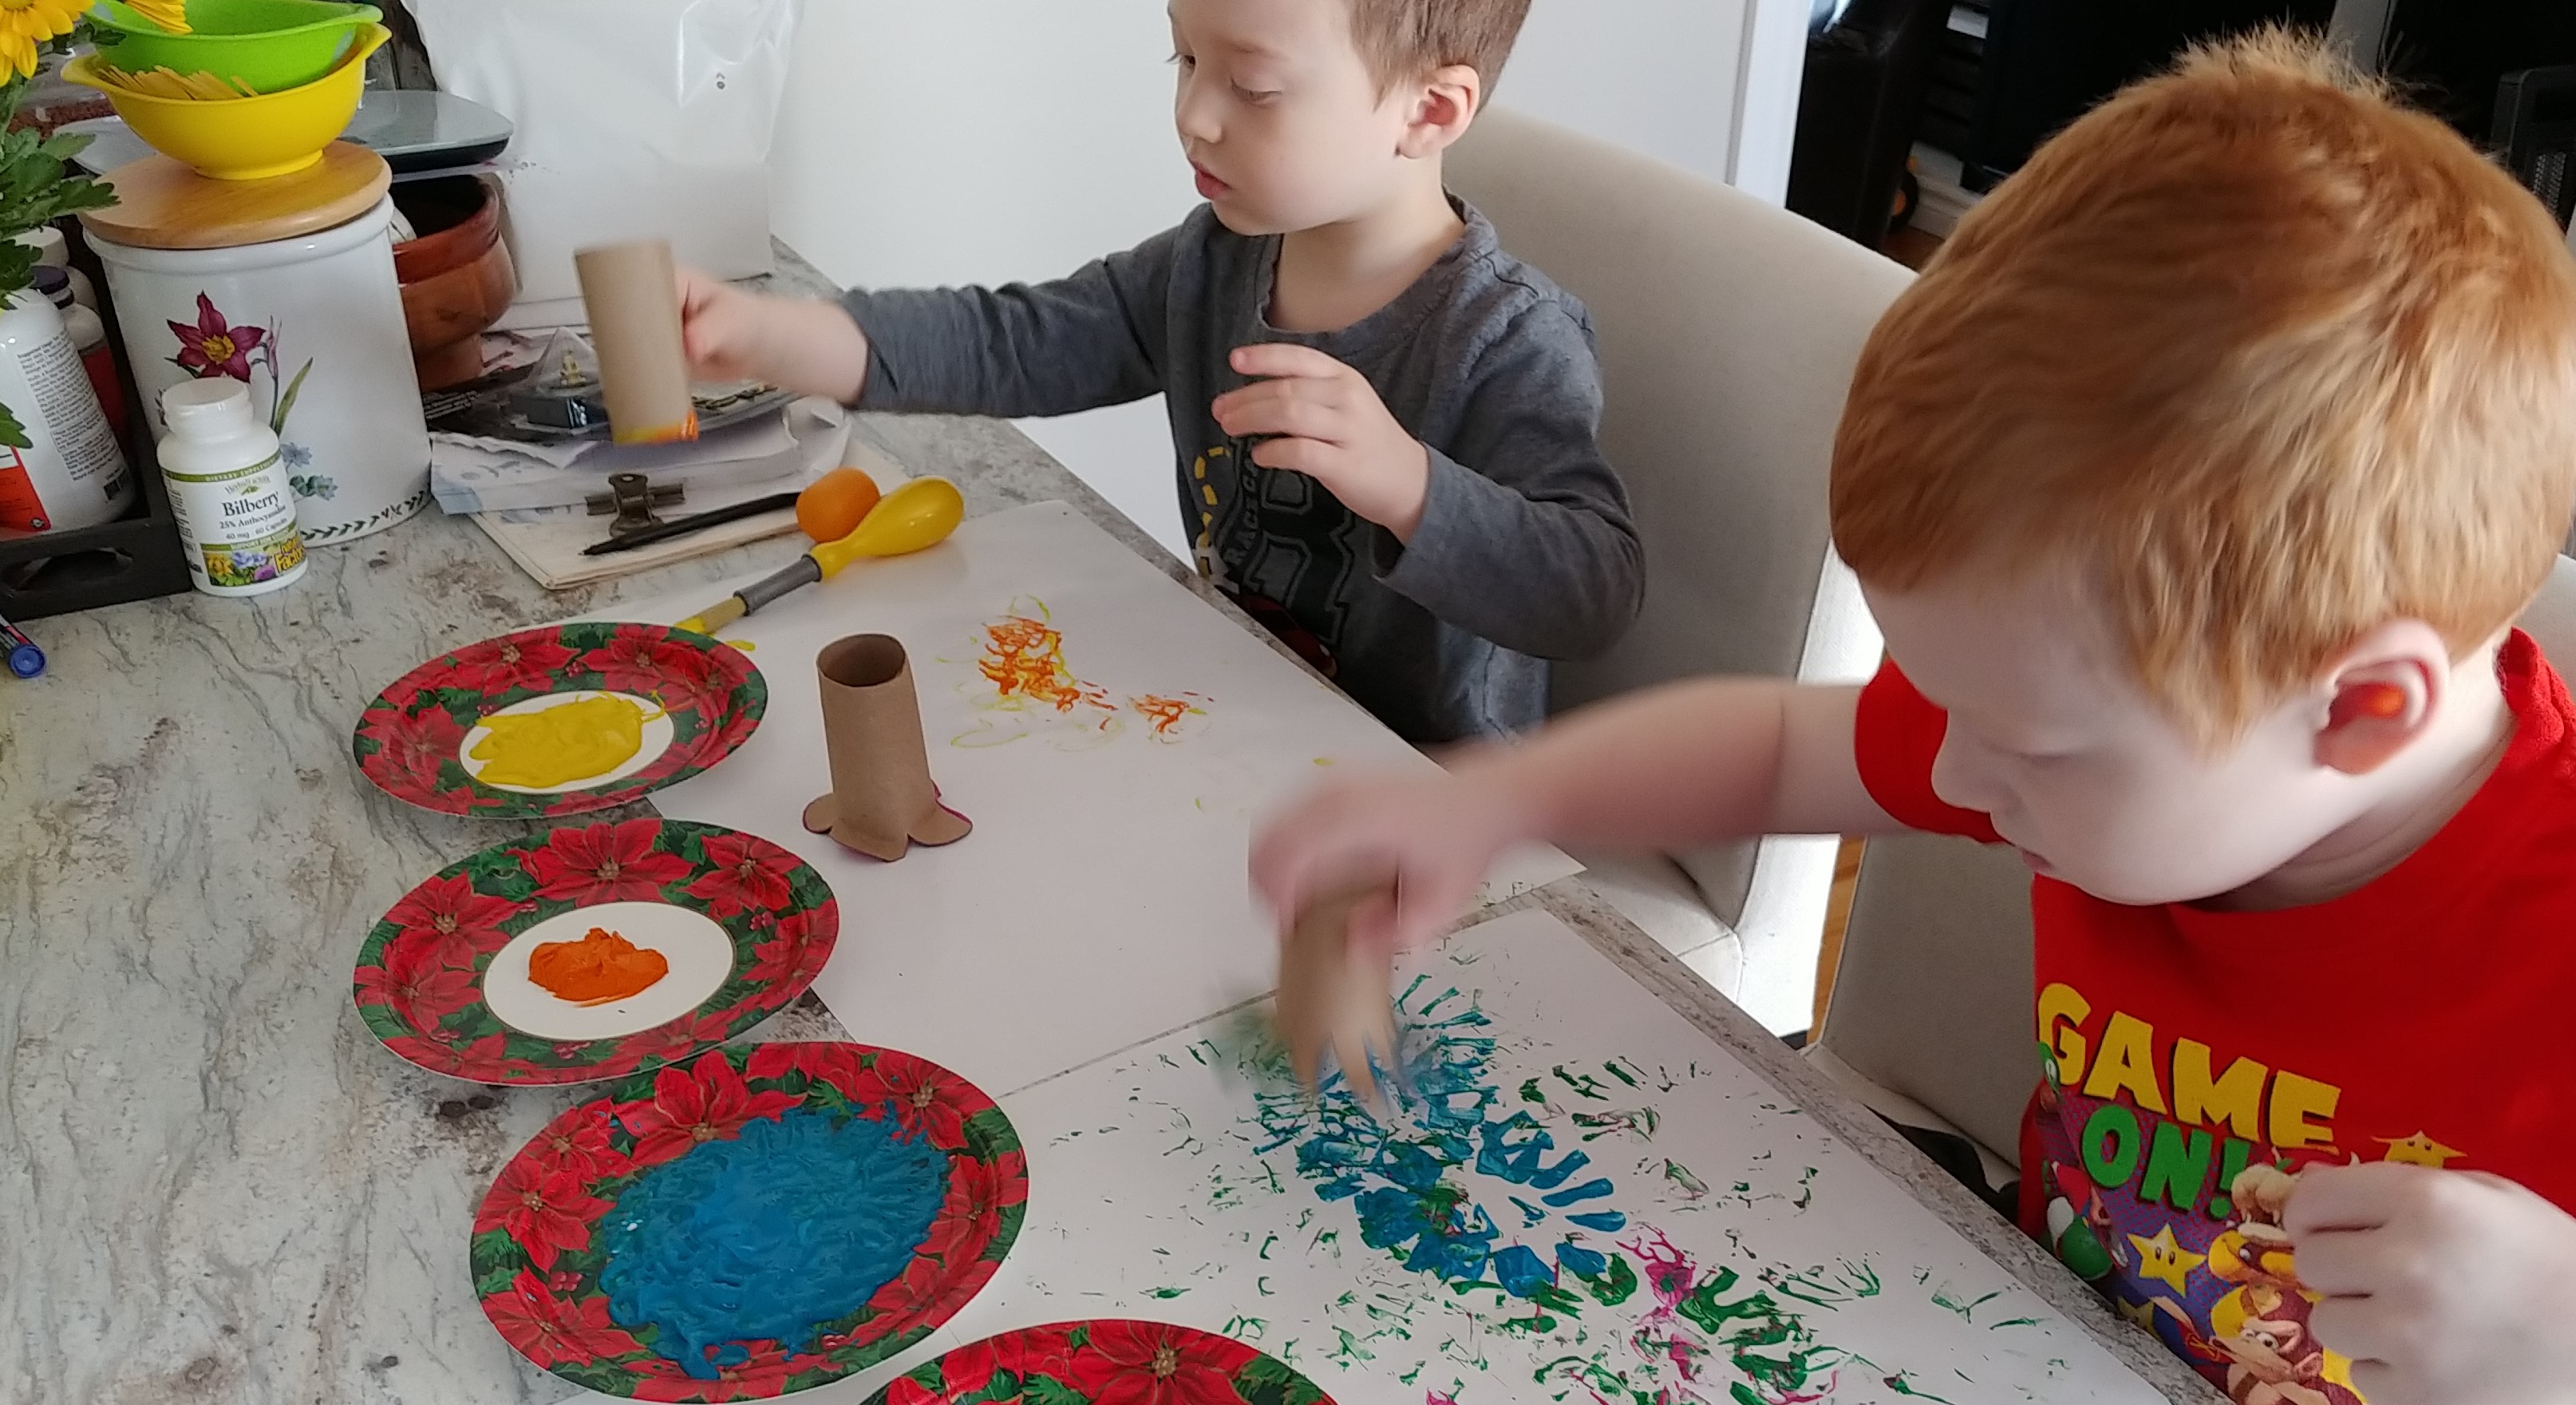 Declan and brother Oliver doing crafts